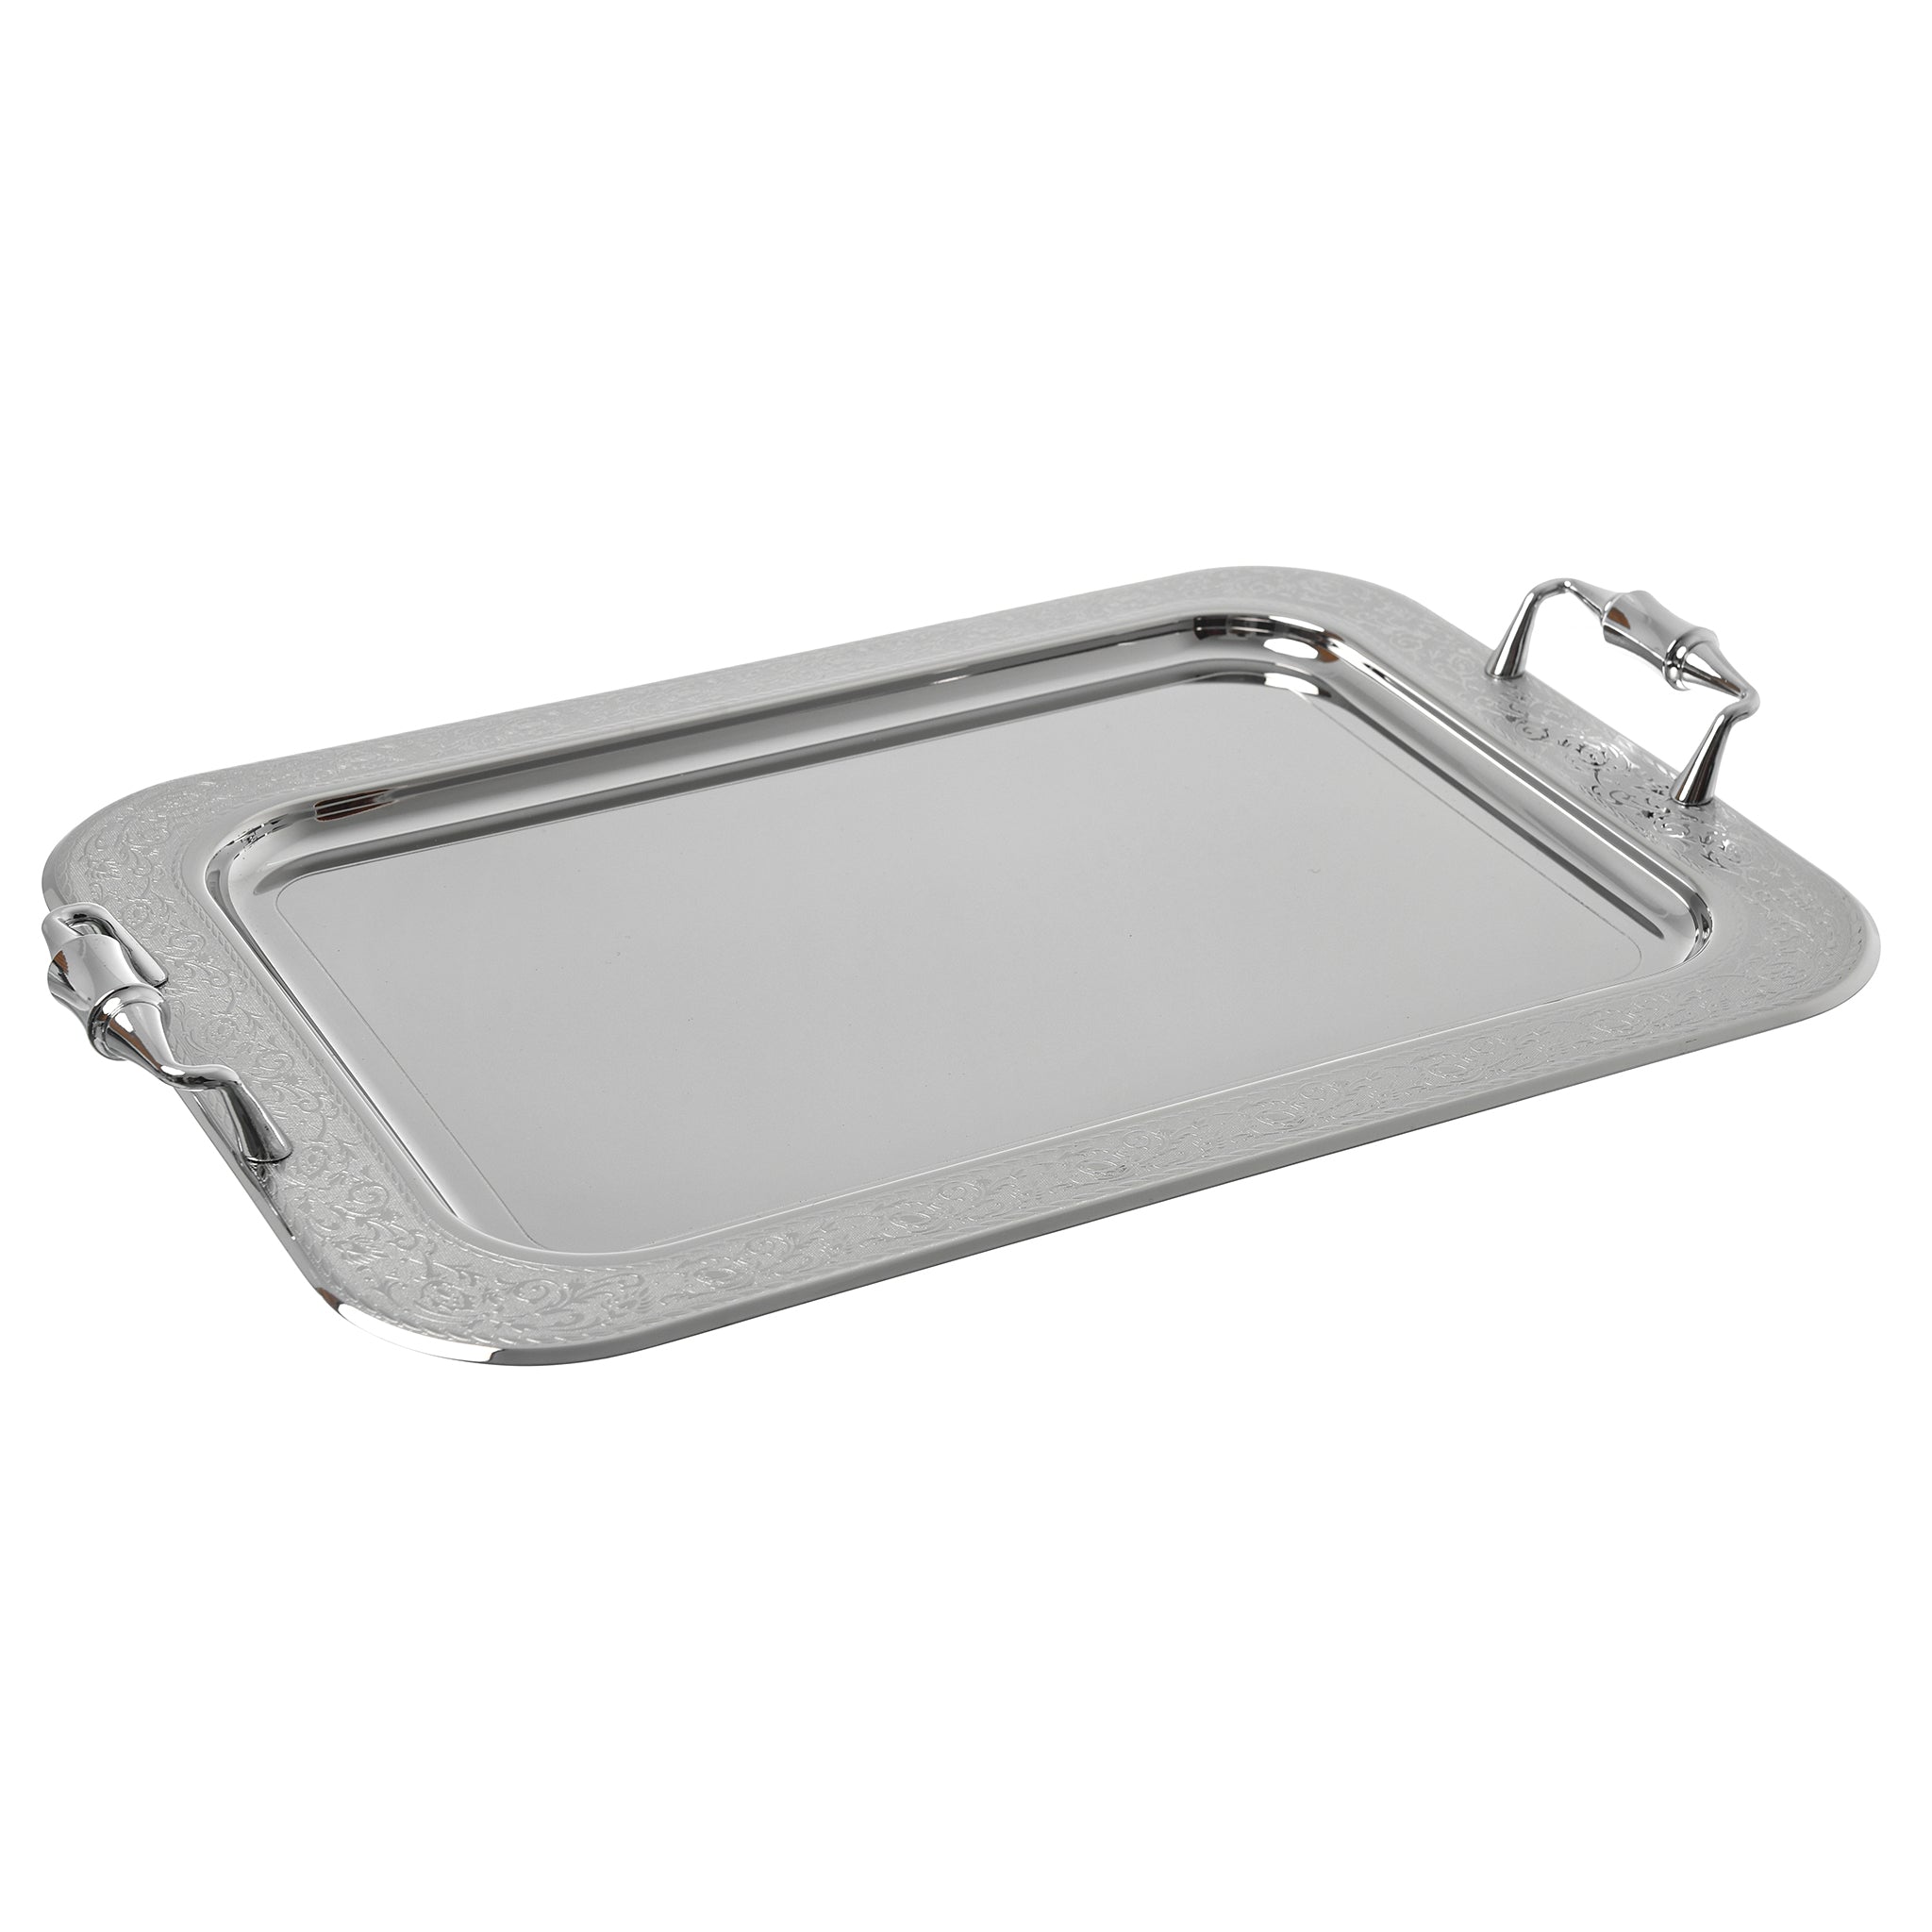 Elegant Gioiel - Rectangular Tray with Handles - Stainless Steel 18/10 - 45cm - 75000363